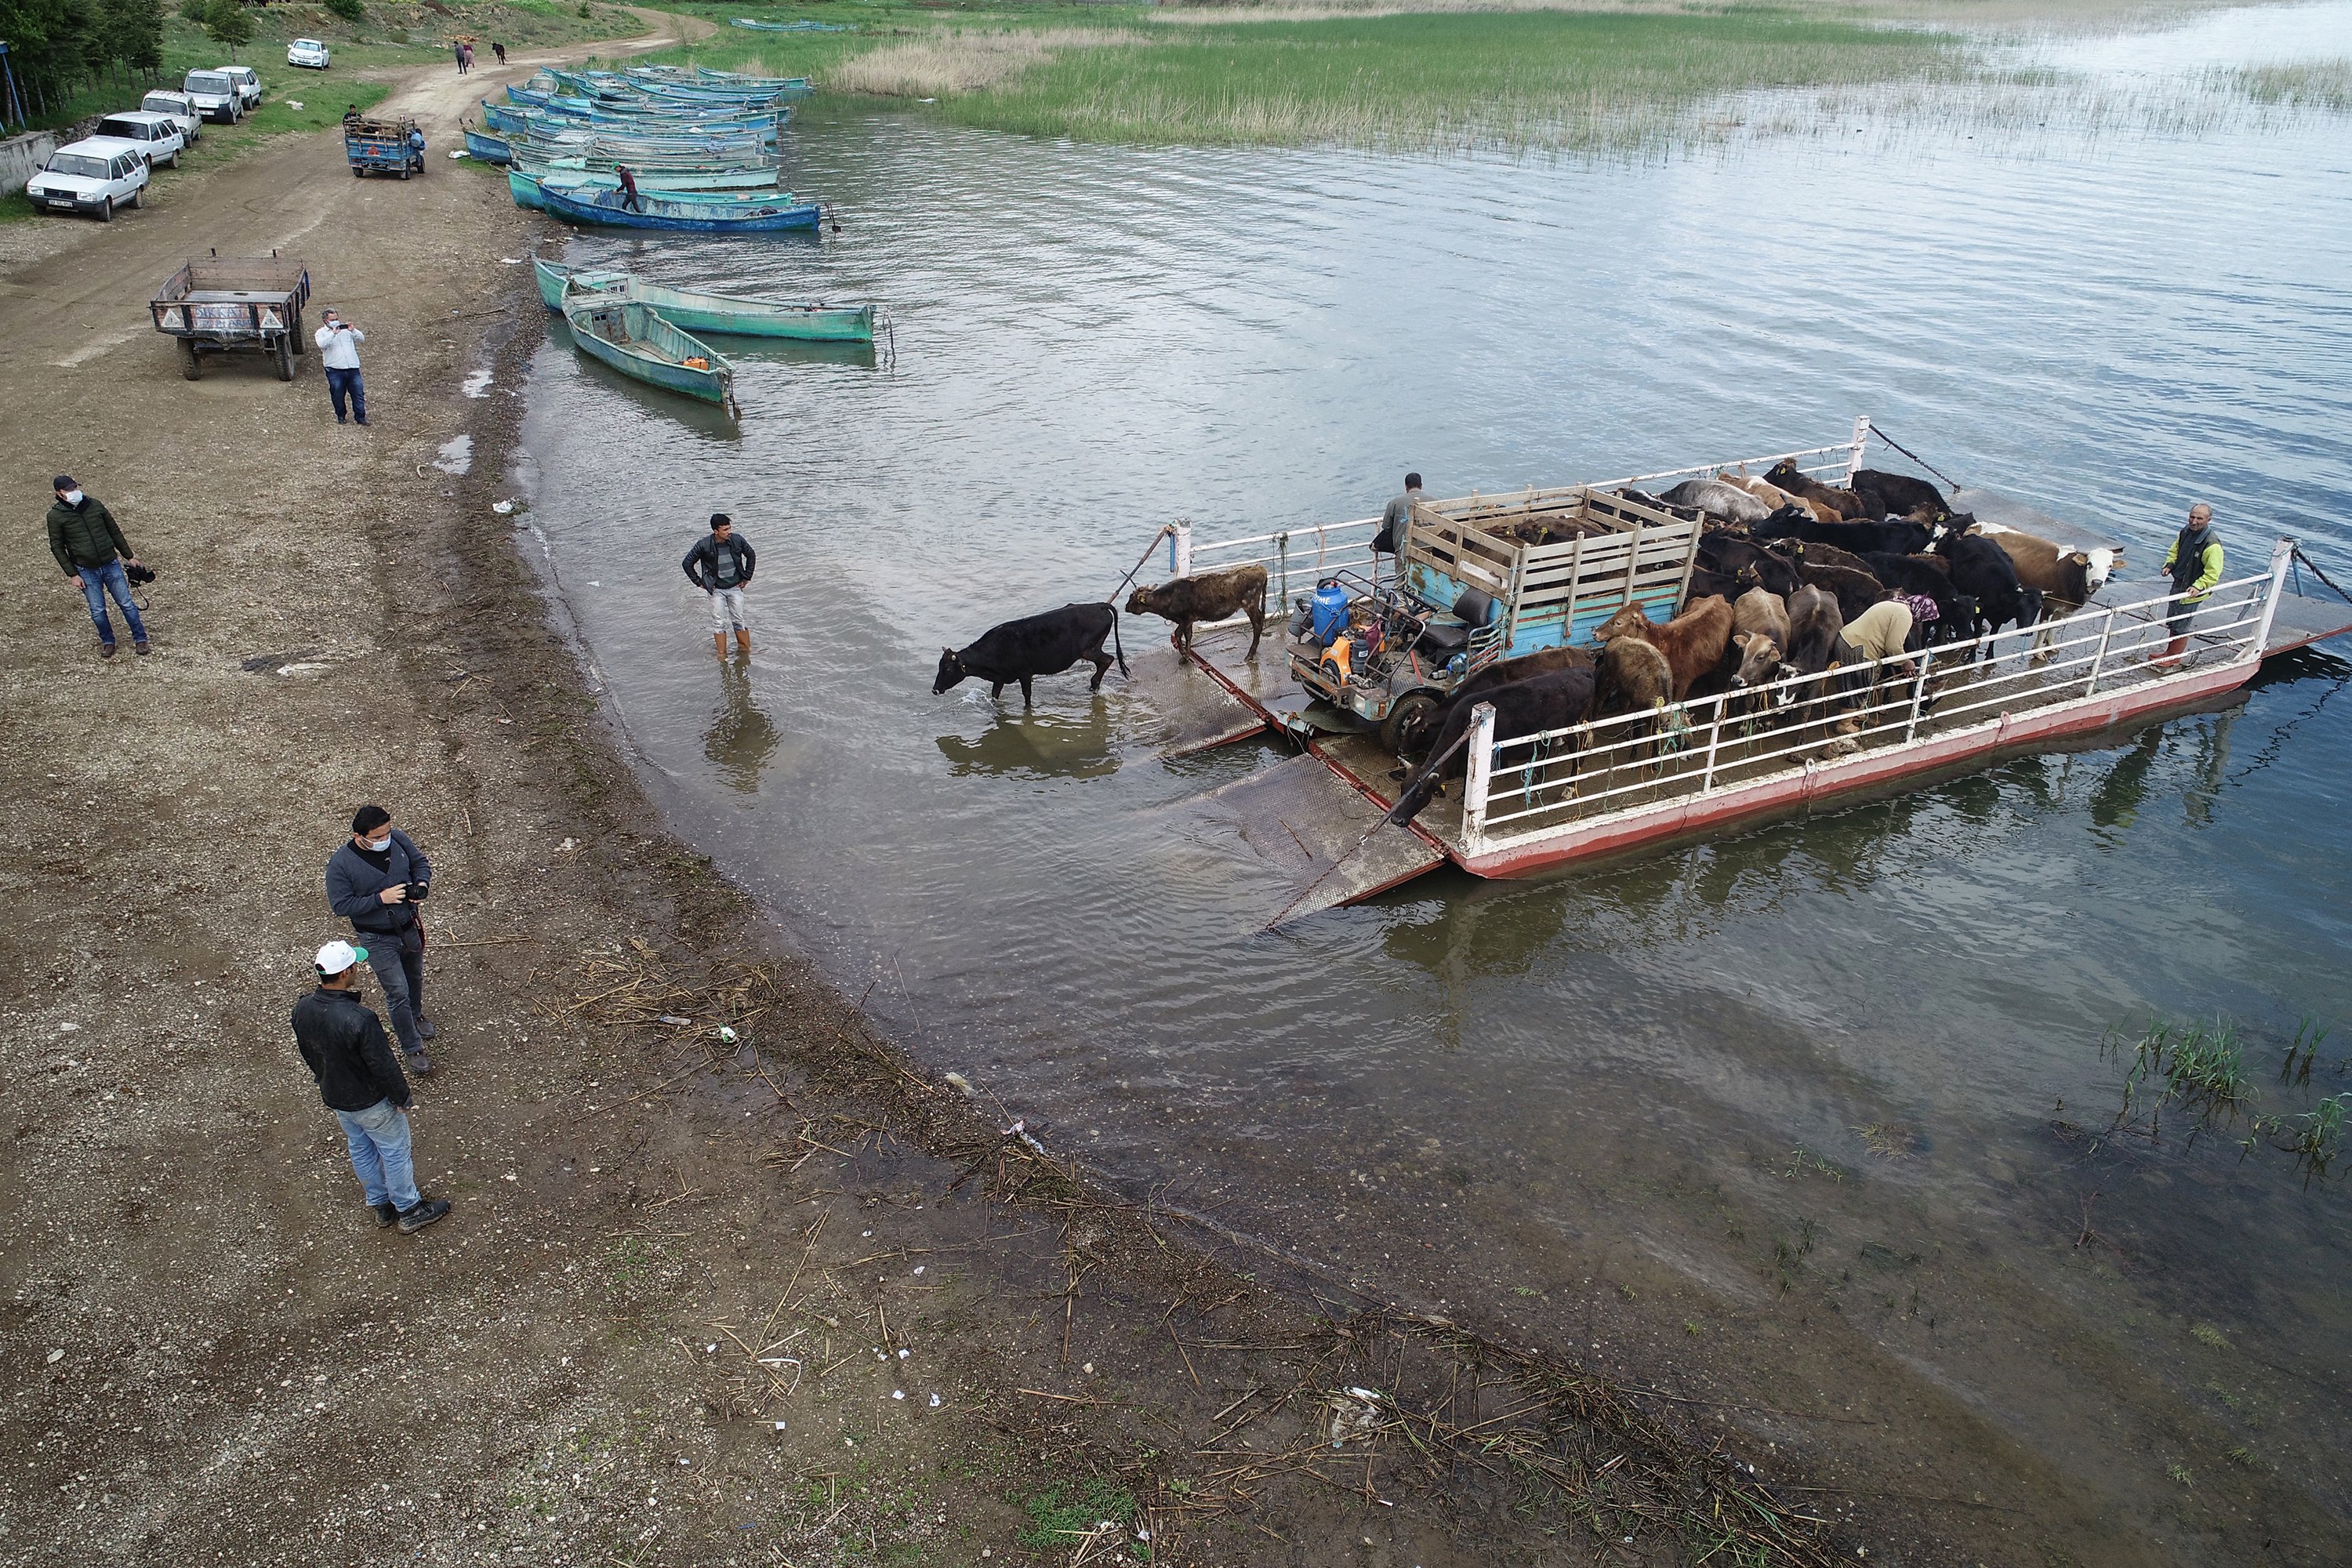 The livestock on the island also gets transported by boat between the mainland and the island to graze on pasture. (AA Photo)